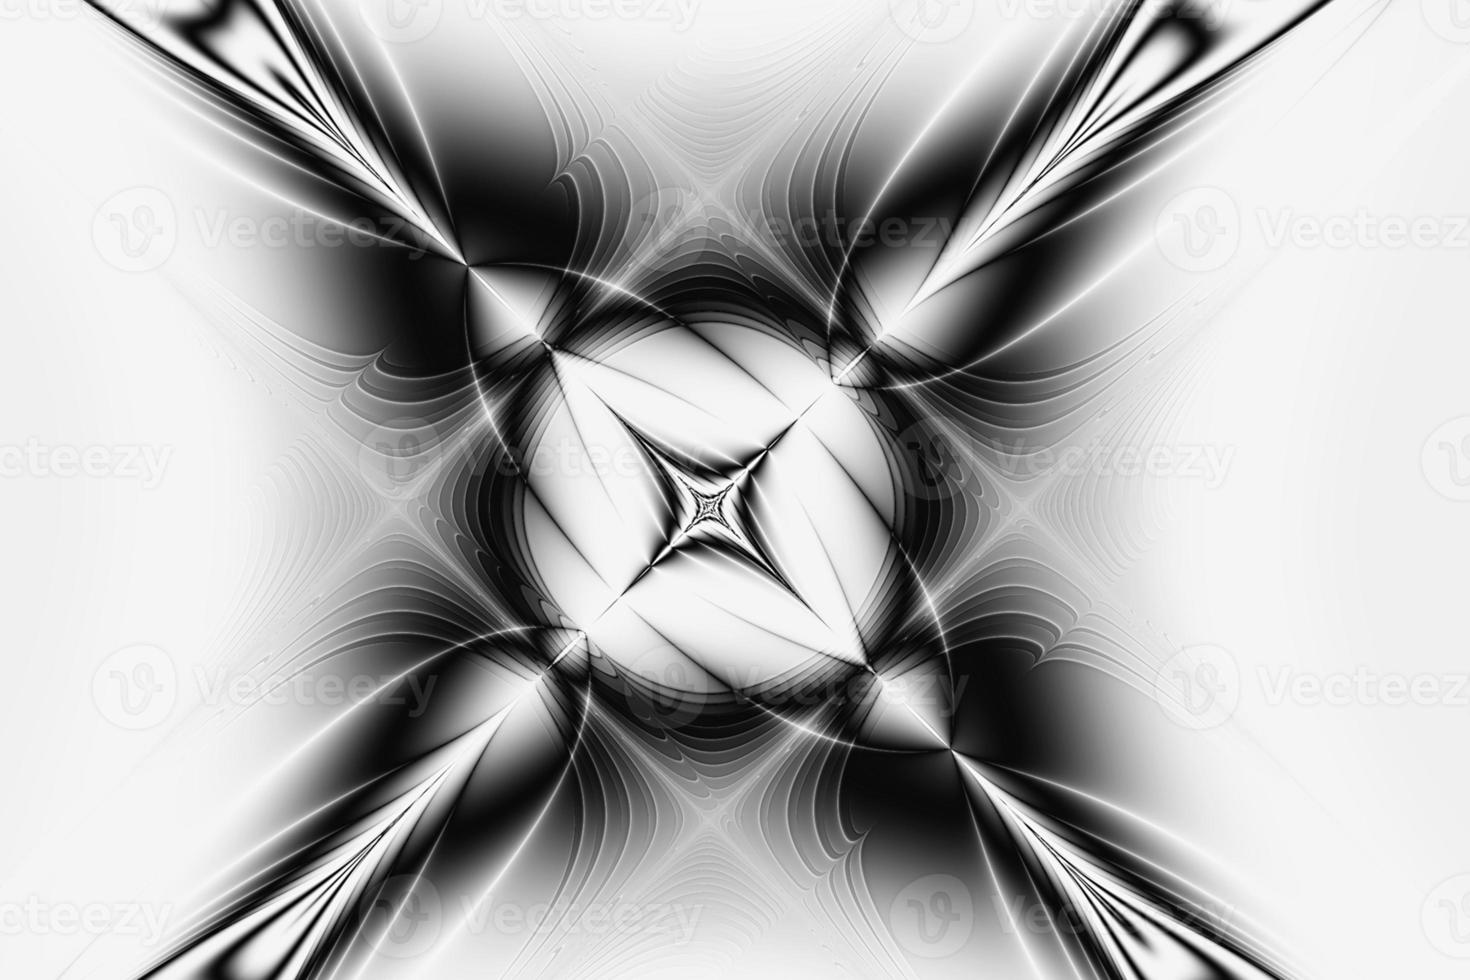 monochrome abstract geometric background, black and white graphic illustration, design photo